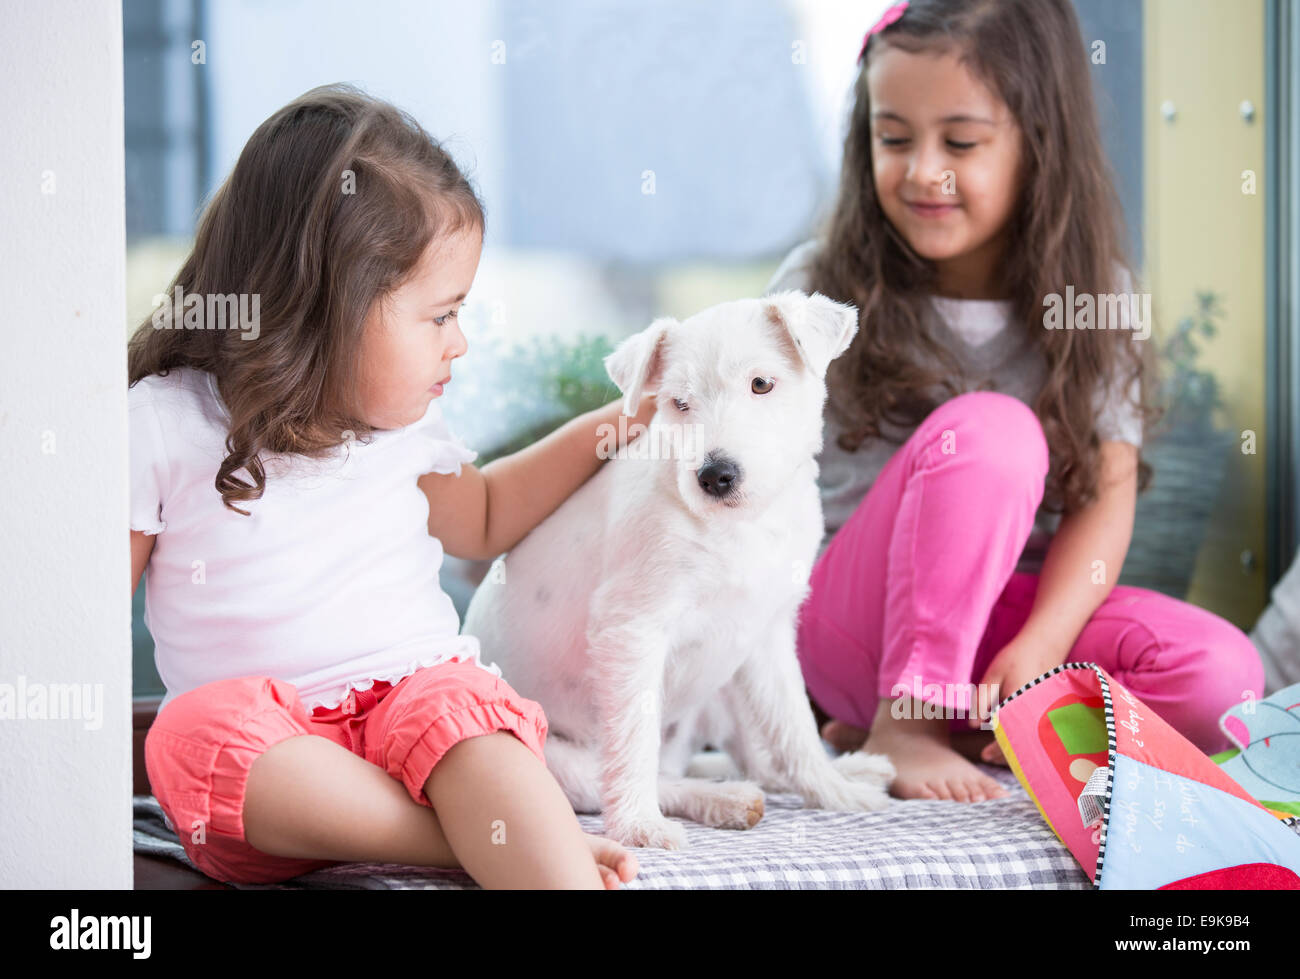 Cute girls with puppy sitting on bed Stock Photo